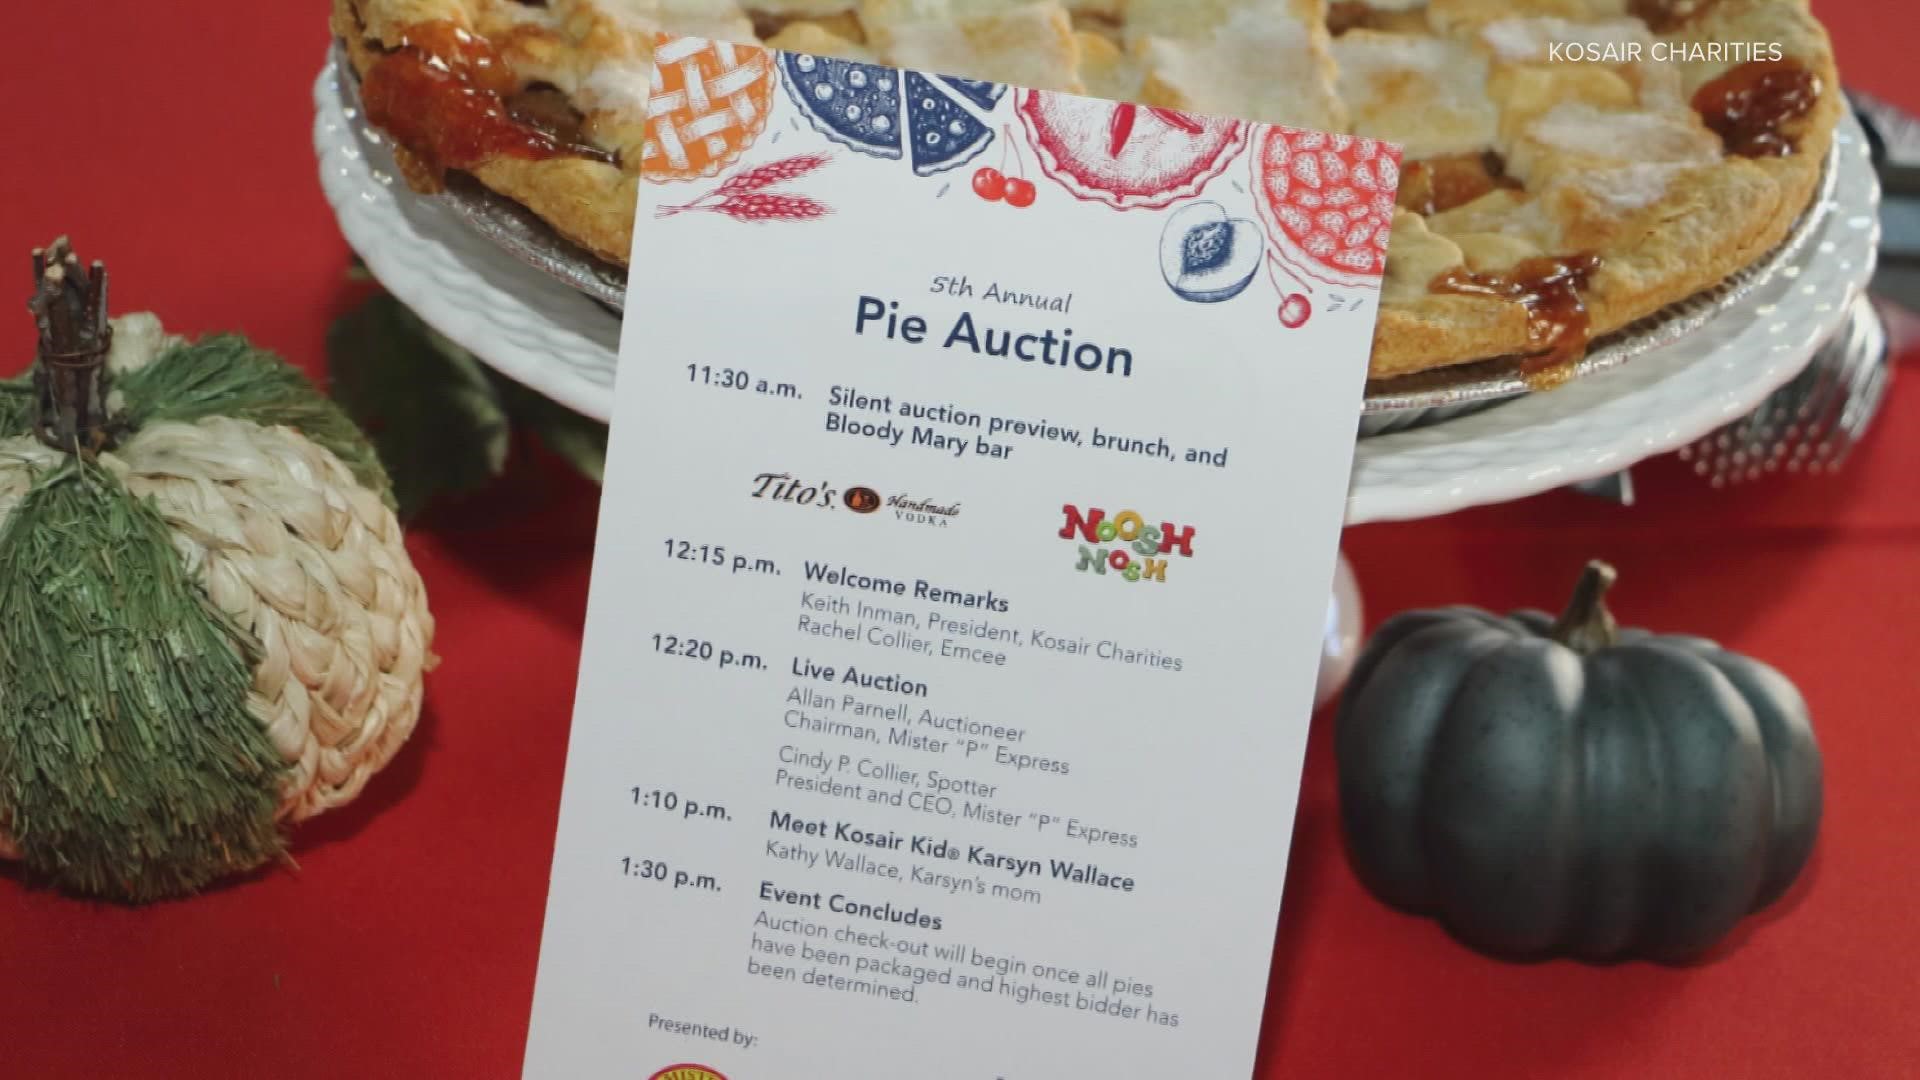 The Kosair Charities Pie Auction is Sunday, Nov. 20 from 12 to 2 p.m. at the Mellwood Arts Center.